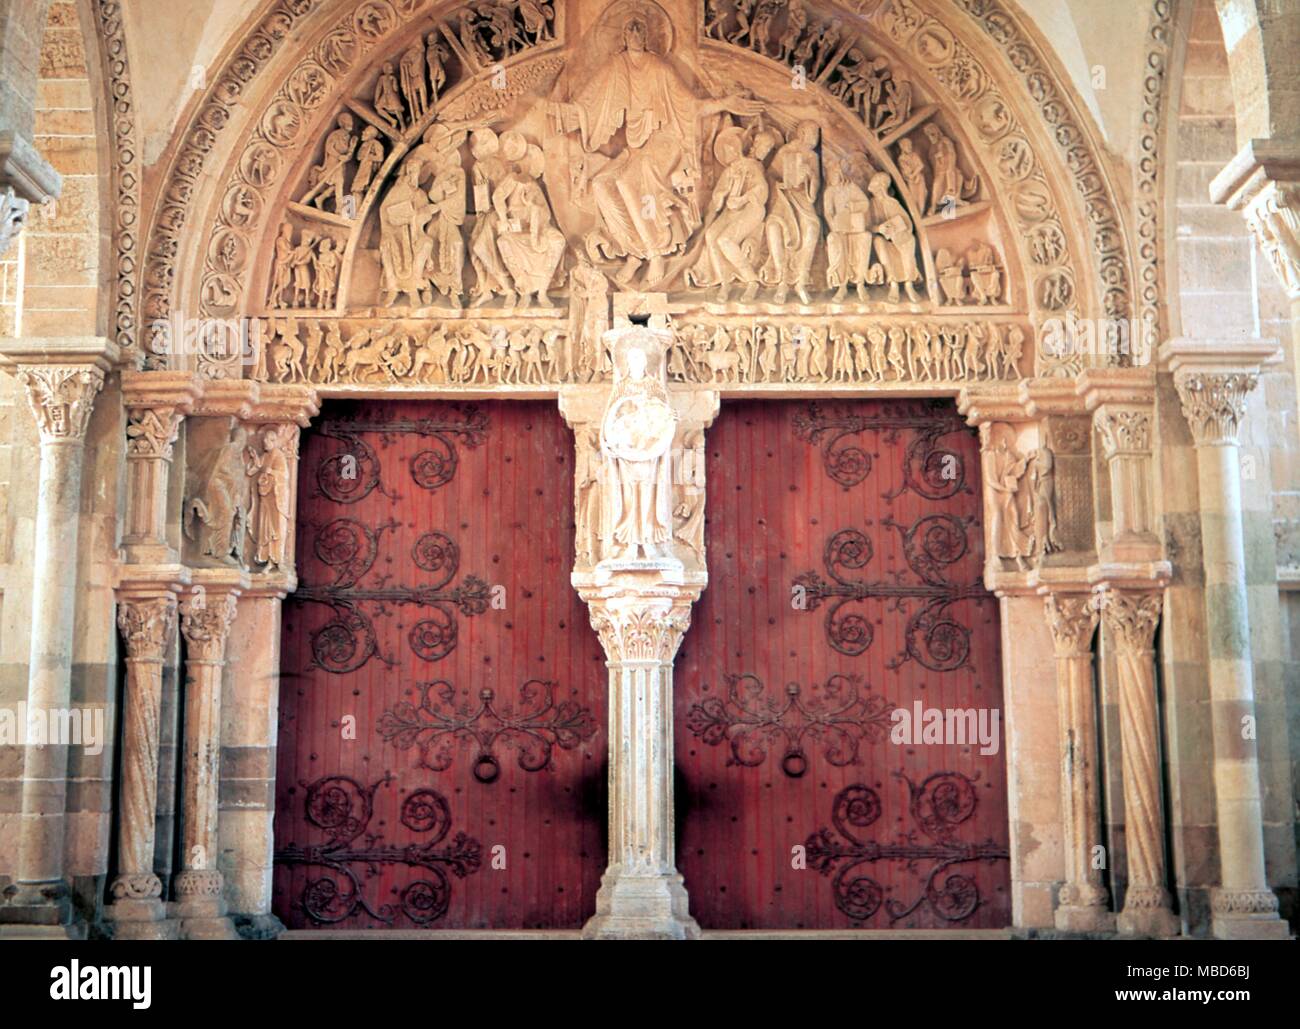 Zodiacal band in the narthex portal of the Madelene basilica, Vezelay, France, Thirteenth century - © / Charles Walker Stock Photo